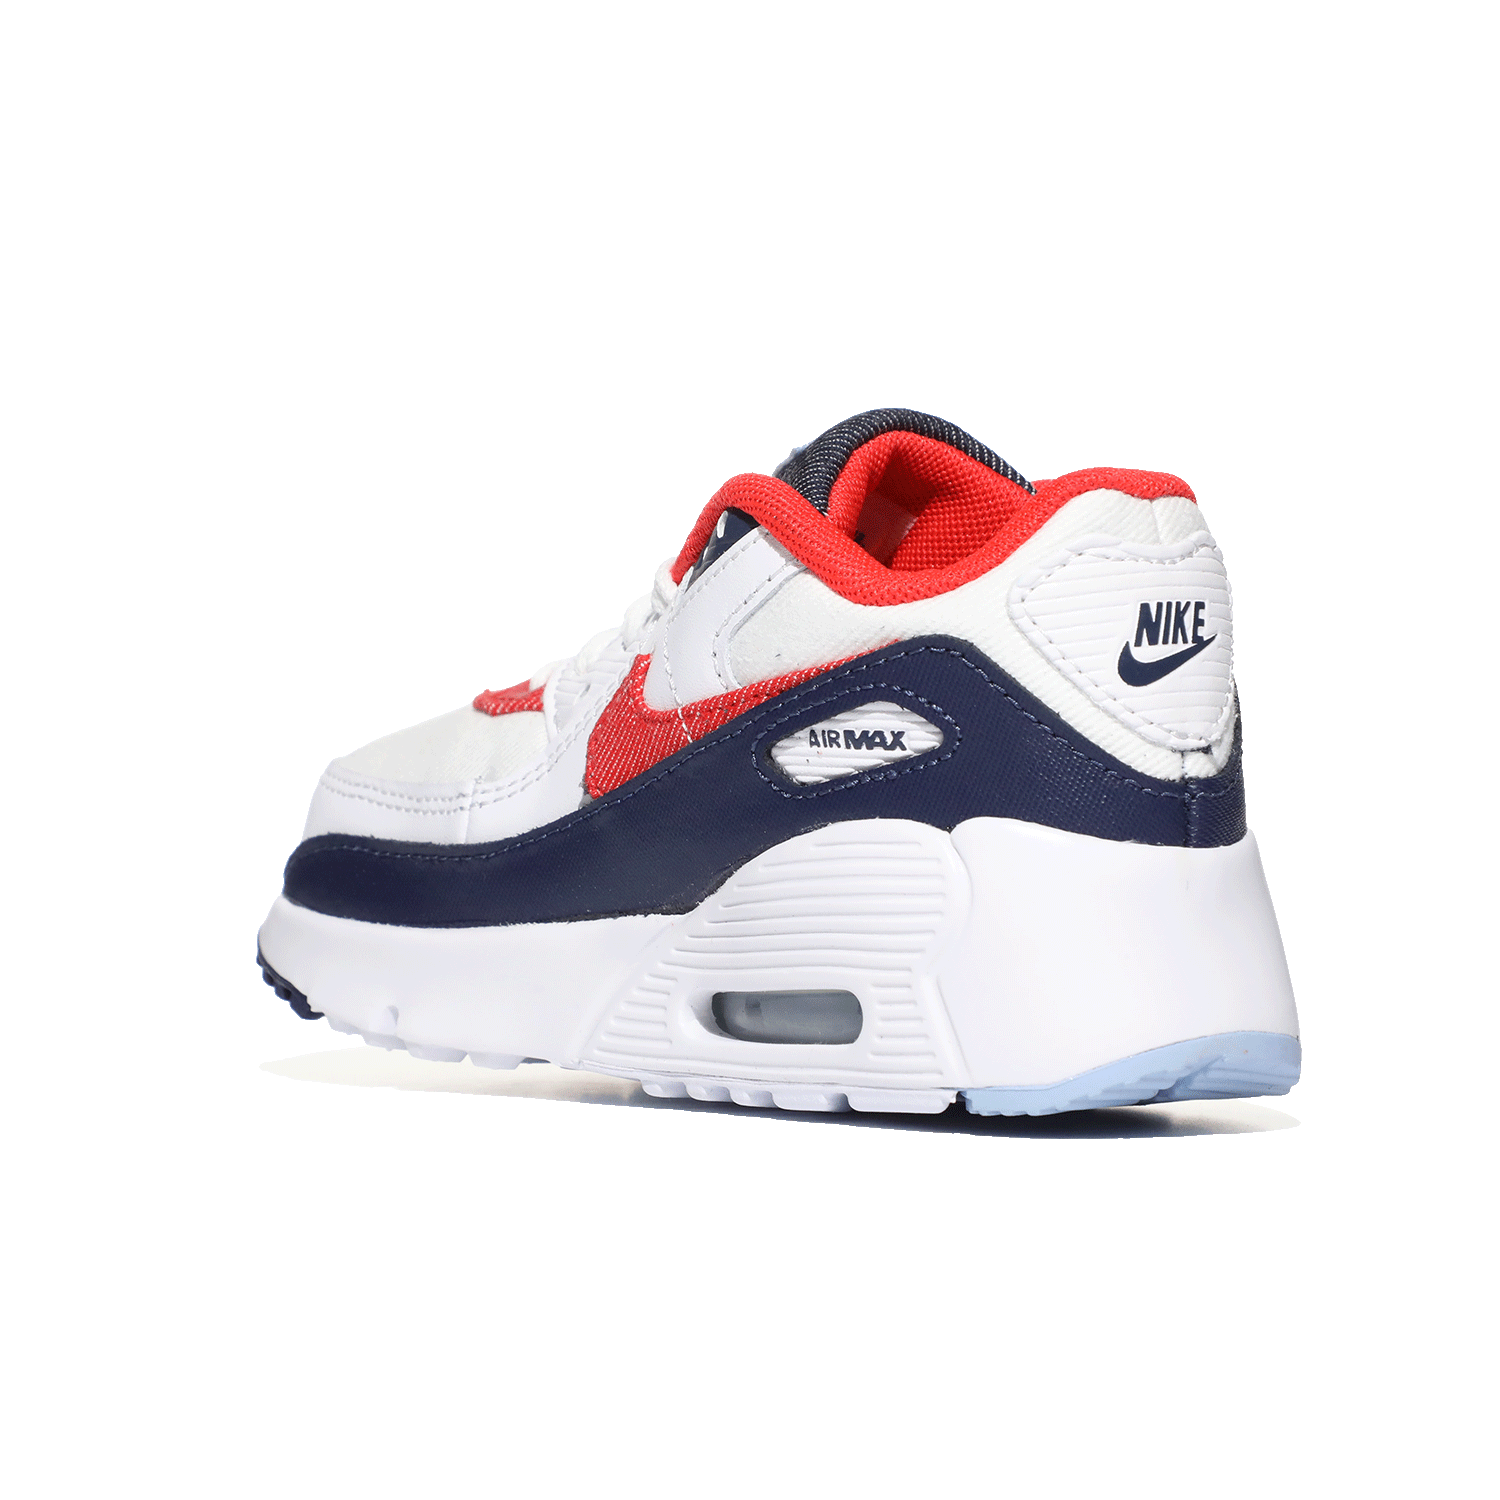 Image 7 of Air Max 90 (Infant/Toddler)